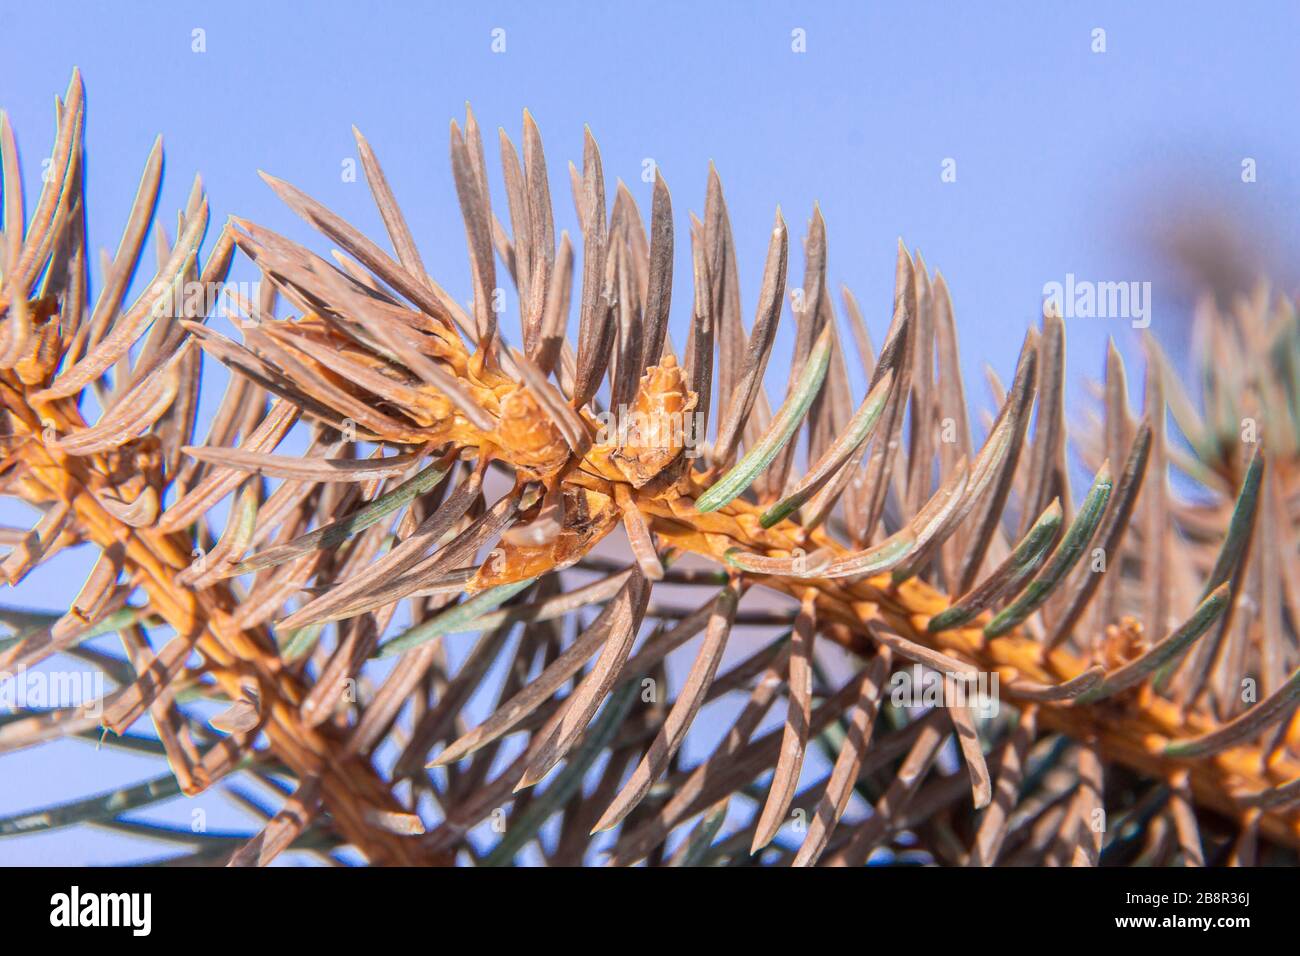 branches of blue spruce that changed the color of the needles to brown, Picea pungens macro and close-up of buds or even small cones with backlighting Stock Photo